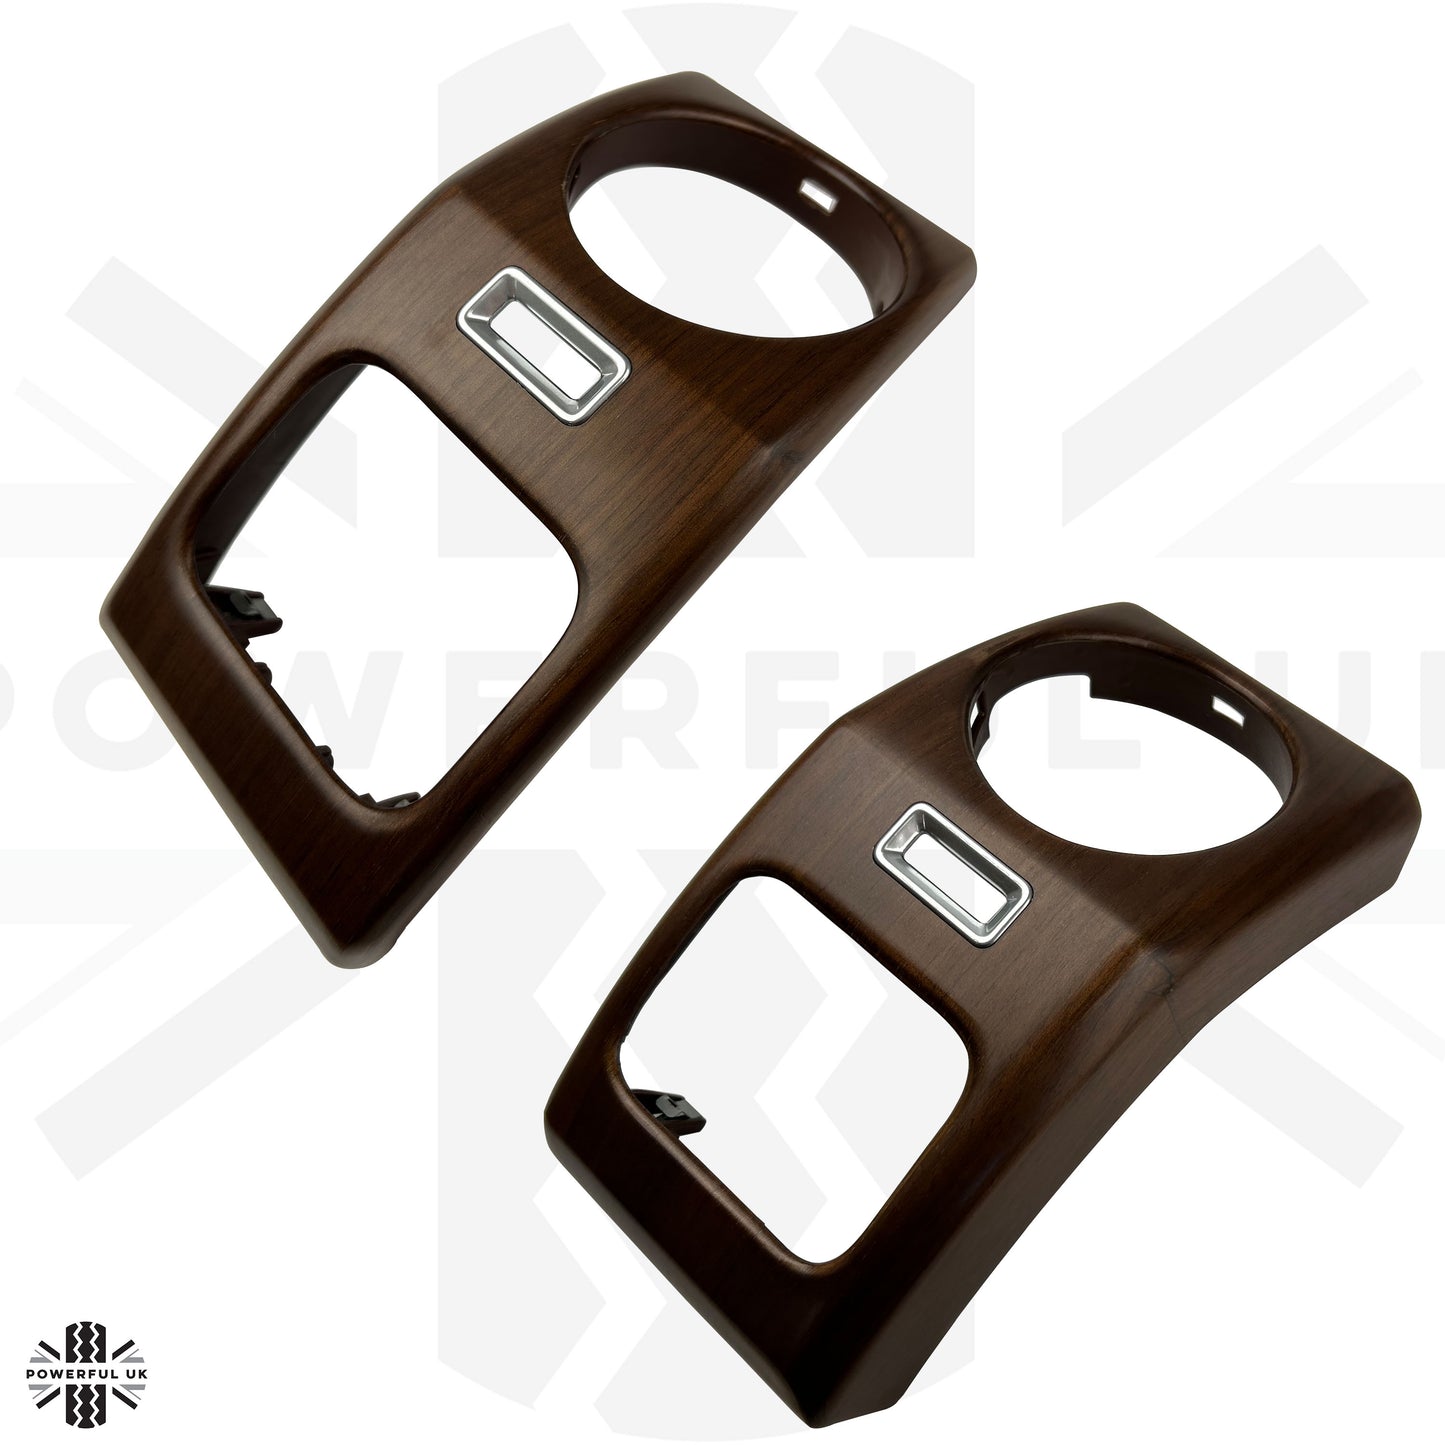 GEnuine Dashboard End Panels in Walnut Veneer for Land Rover Discovery 3 - Pair